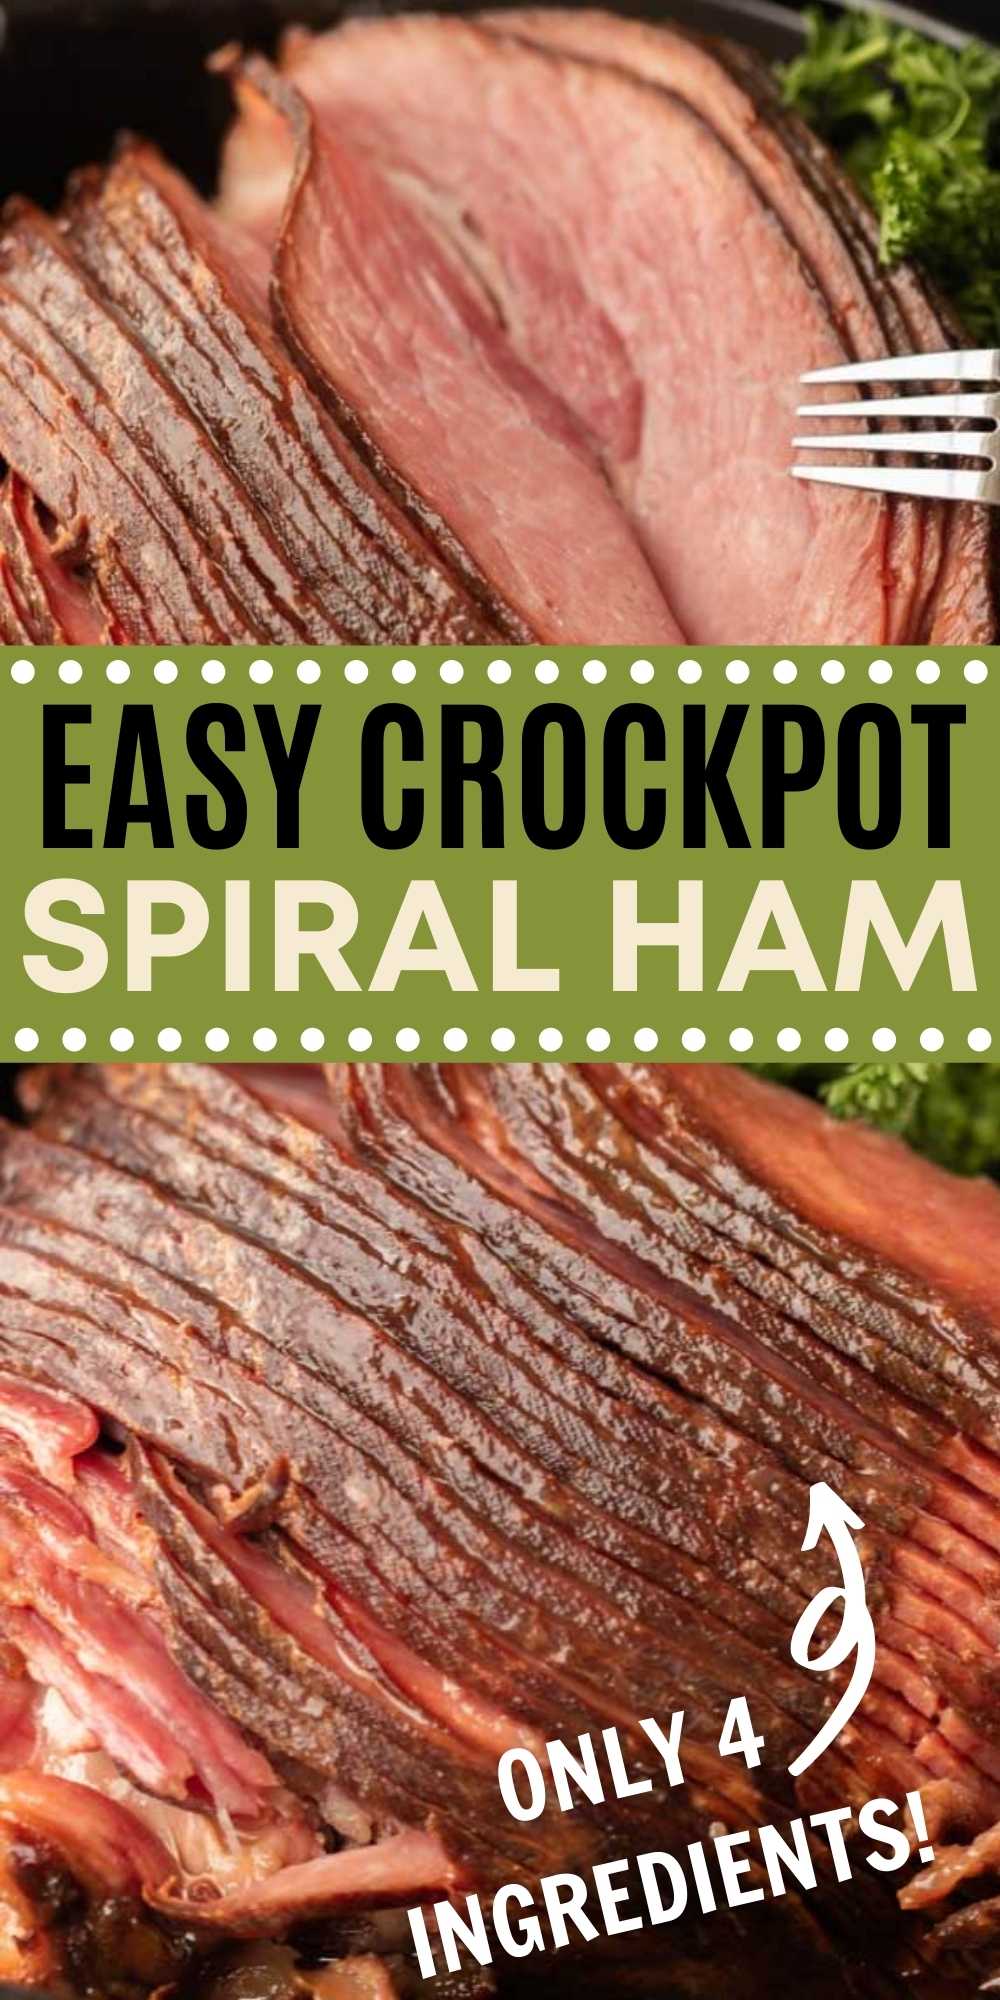 Crock pot Ham Recipe is easy to make with only 4 ingredients. Slow cooker ham is perfect for the holidays and frees up your oven for all your other side dishes. Try this crockpot spiral ham today! This is the BESTA way to make a ham for the holidays. #eatingonadime #crockpotrecipes #slowcookerrecipes #hamrecipes #holidayrecipes